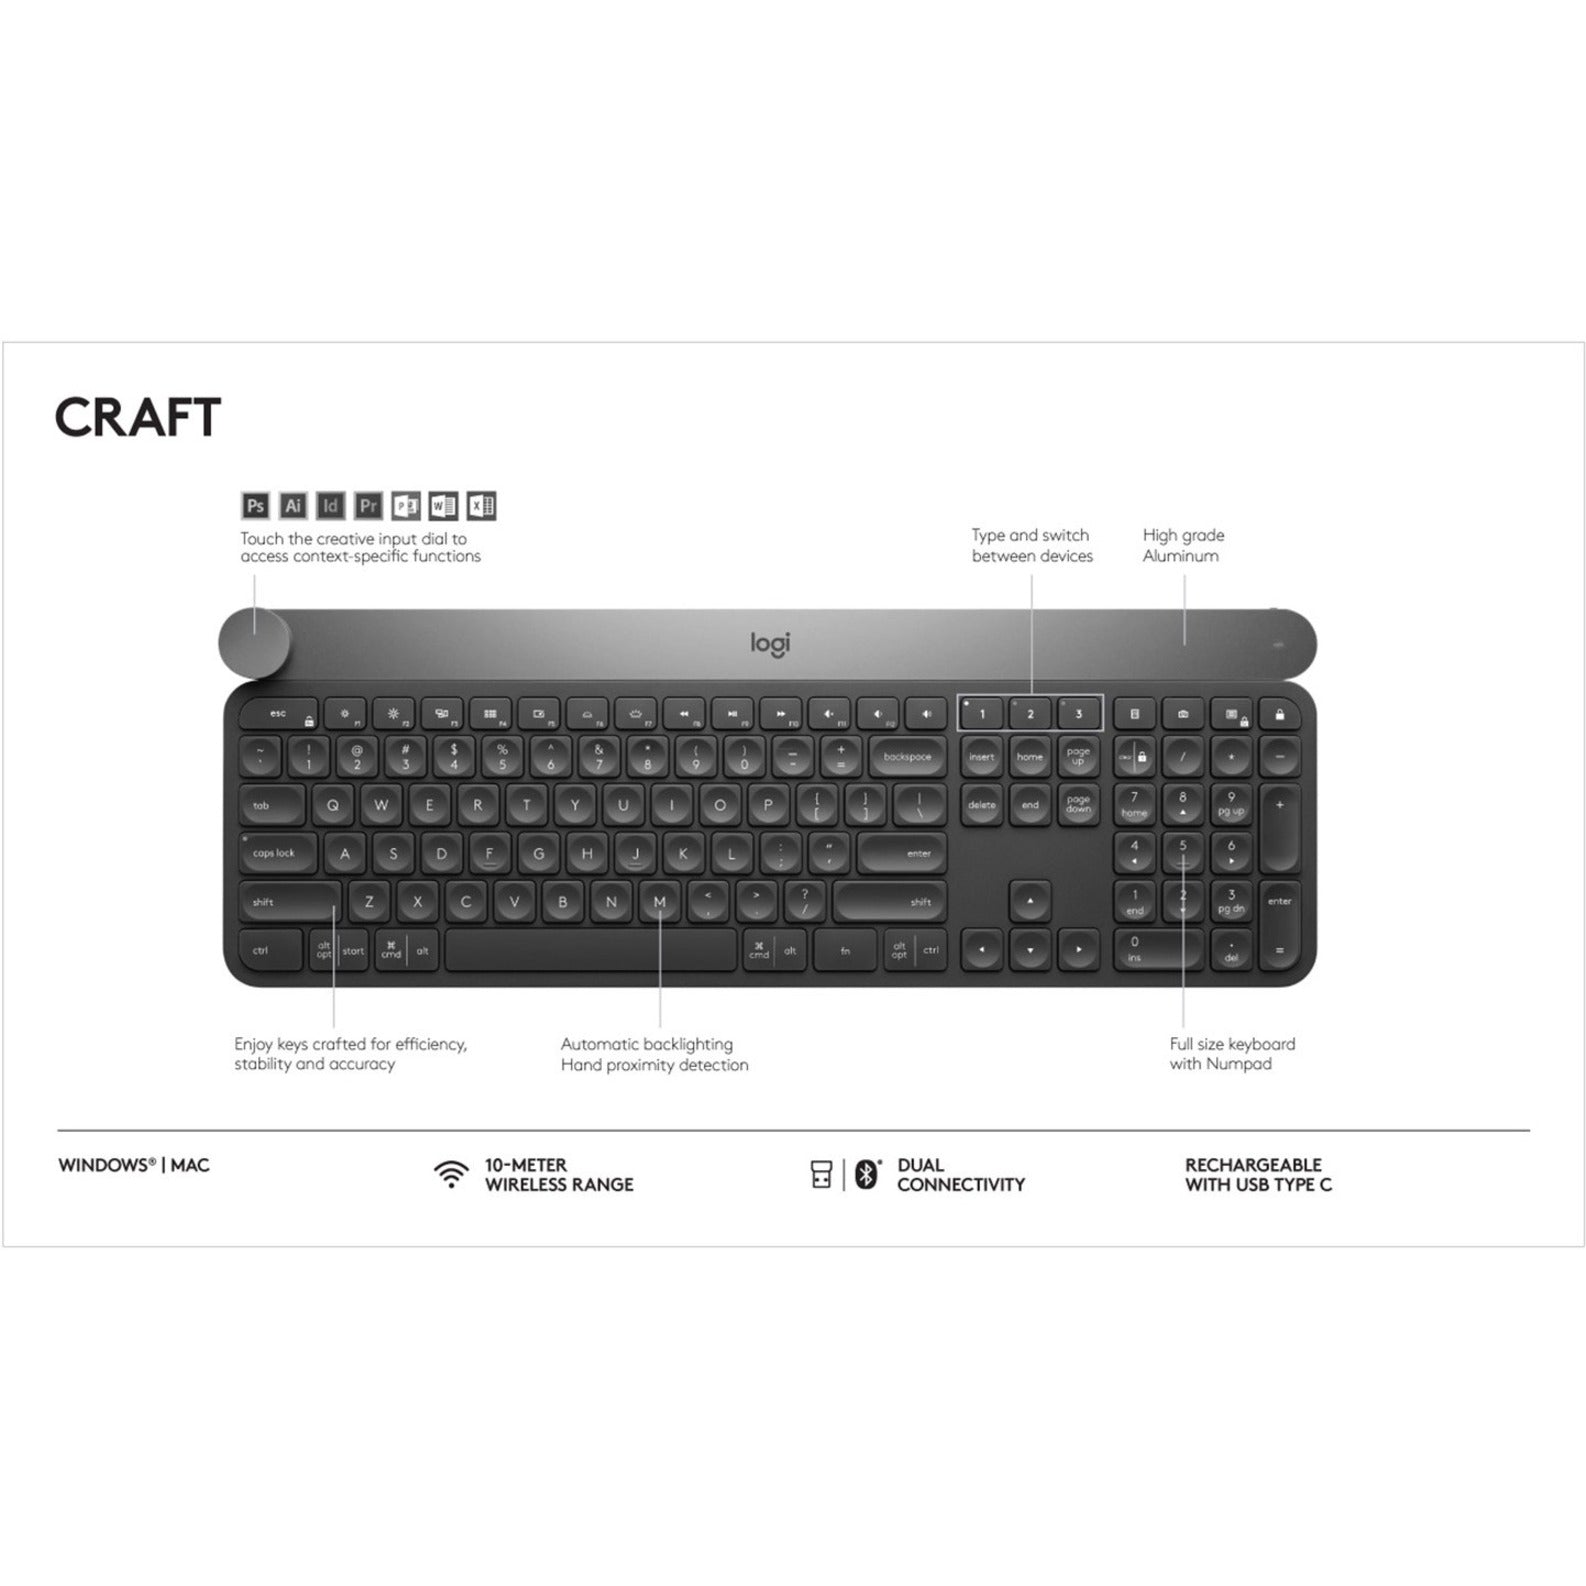 Logitech Craft Advanced Keyboard with Creative Input Dial [Discontinued]